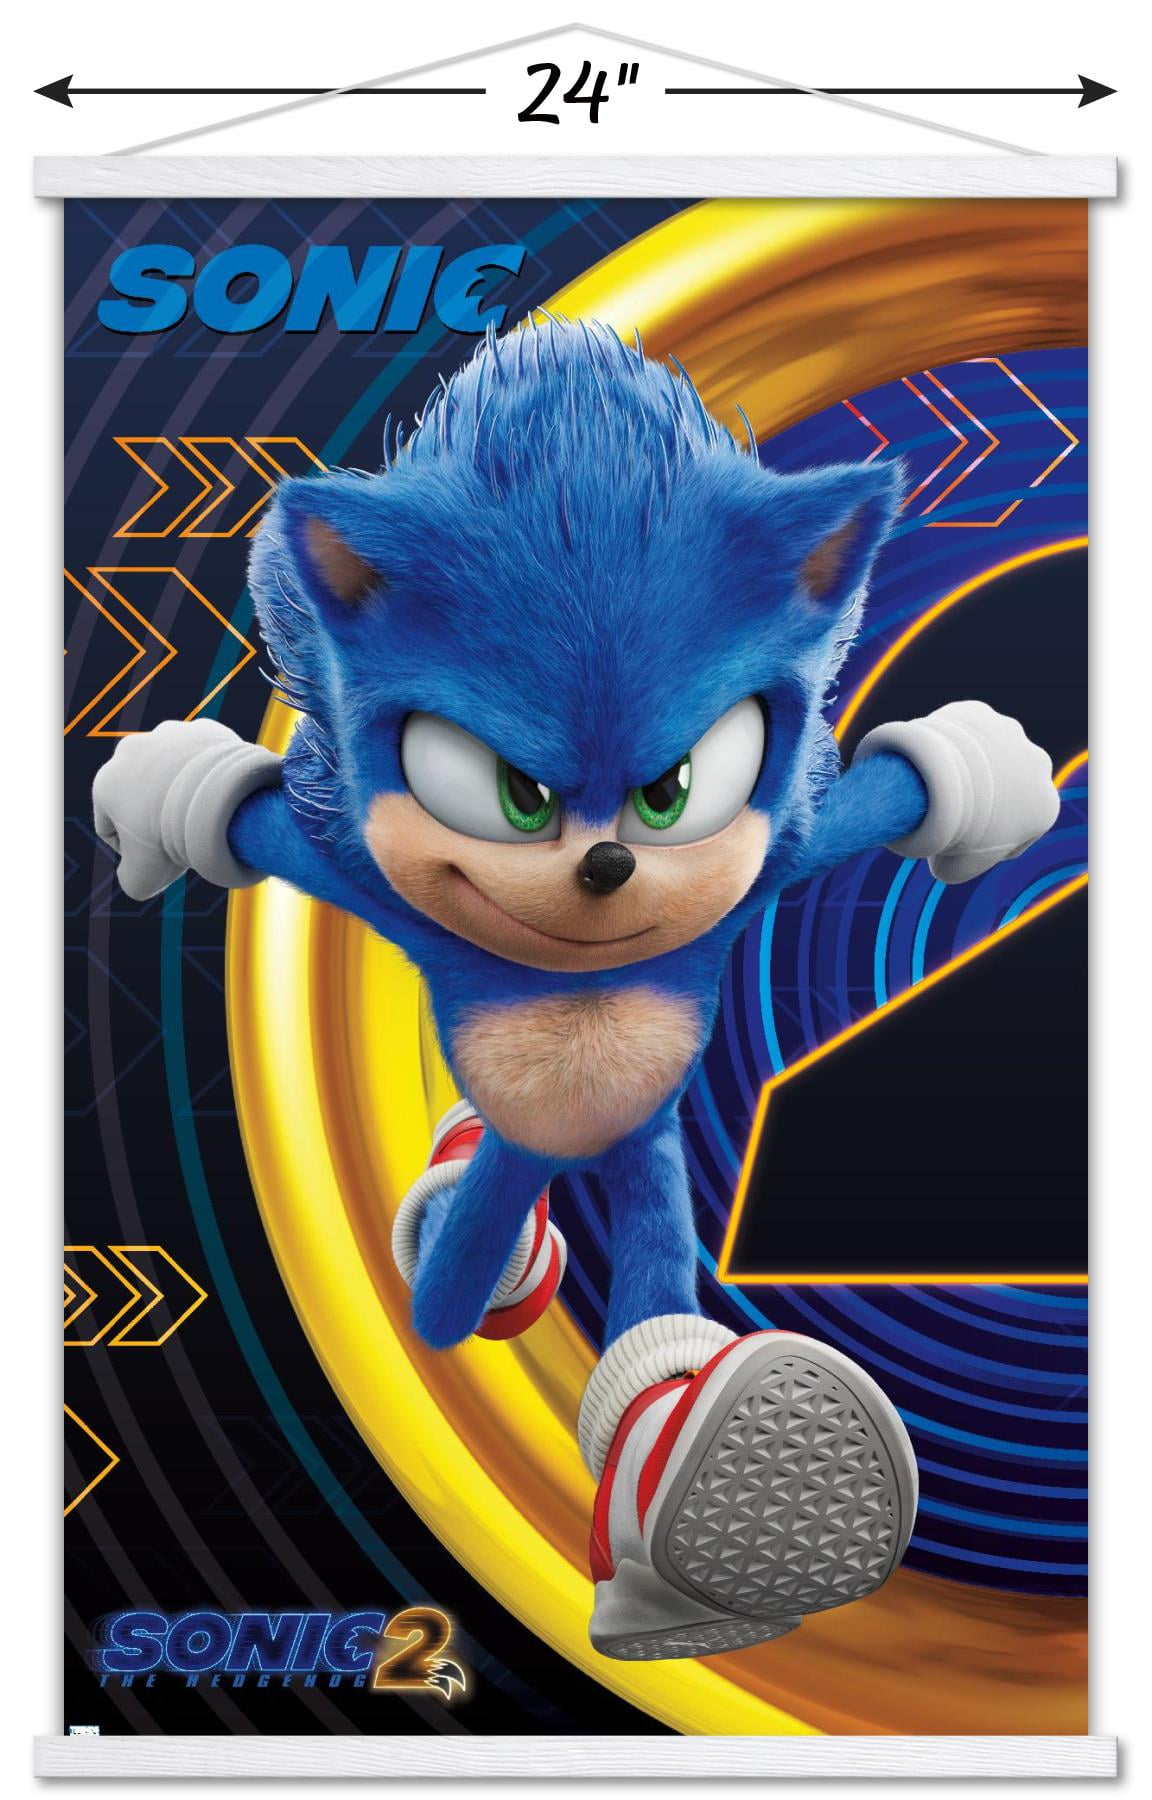 Sonic the Hedgehog Movie Poster Framed and Ready to Hang. -  Norway